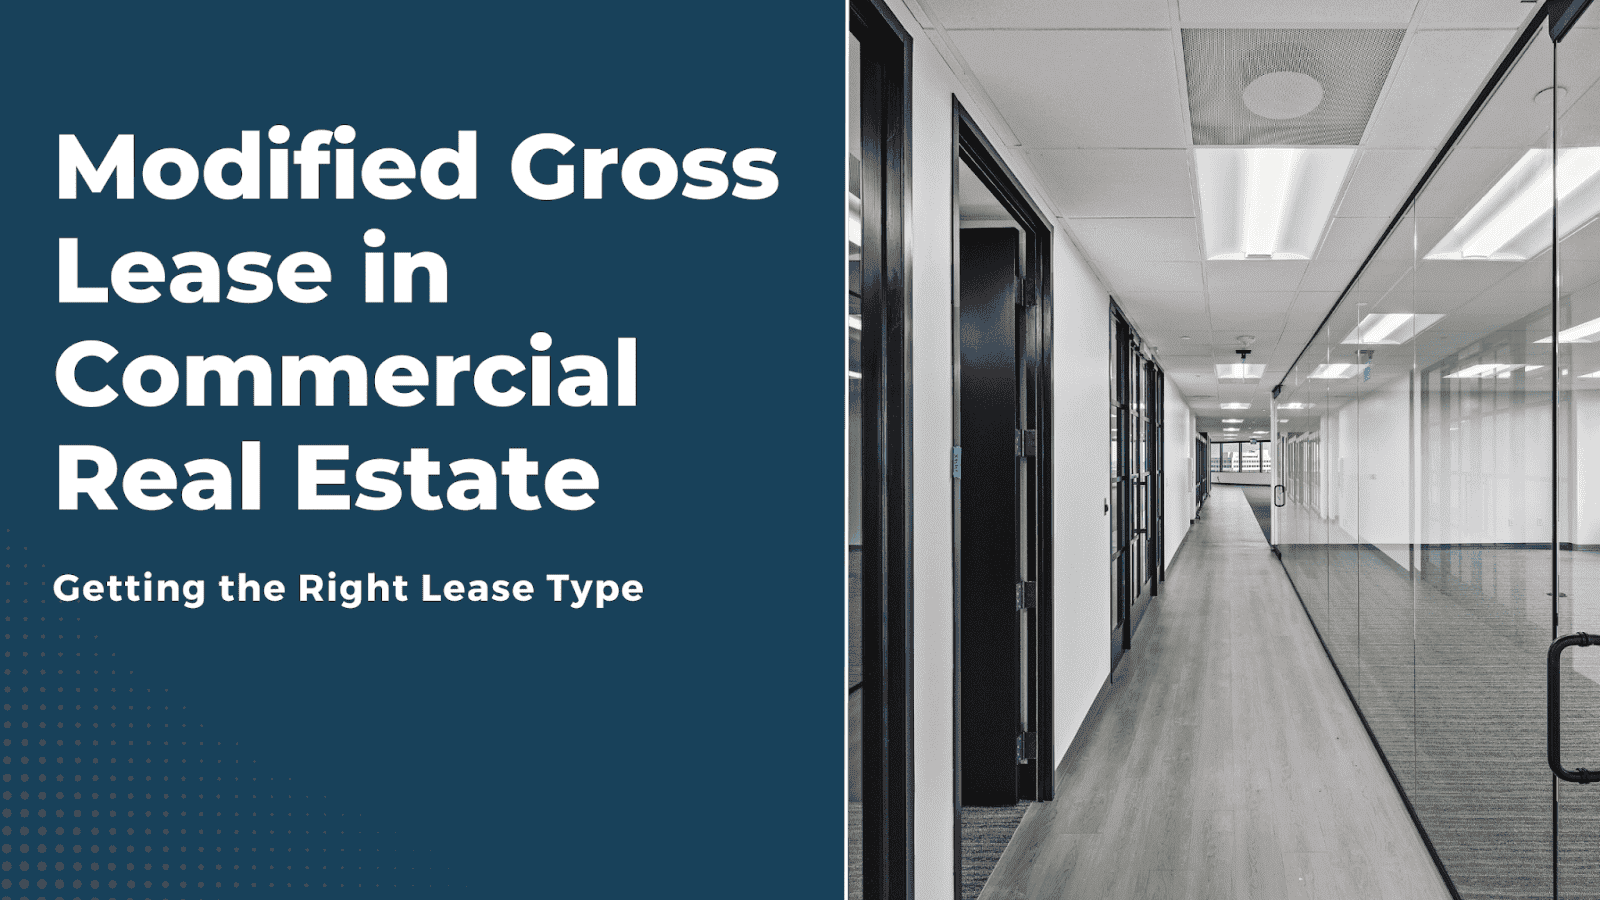 Modified Gross Lease in Commercial Real Estate: Getting the Right Lease Type